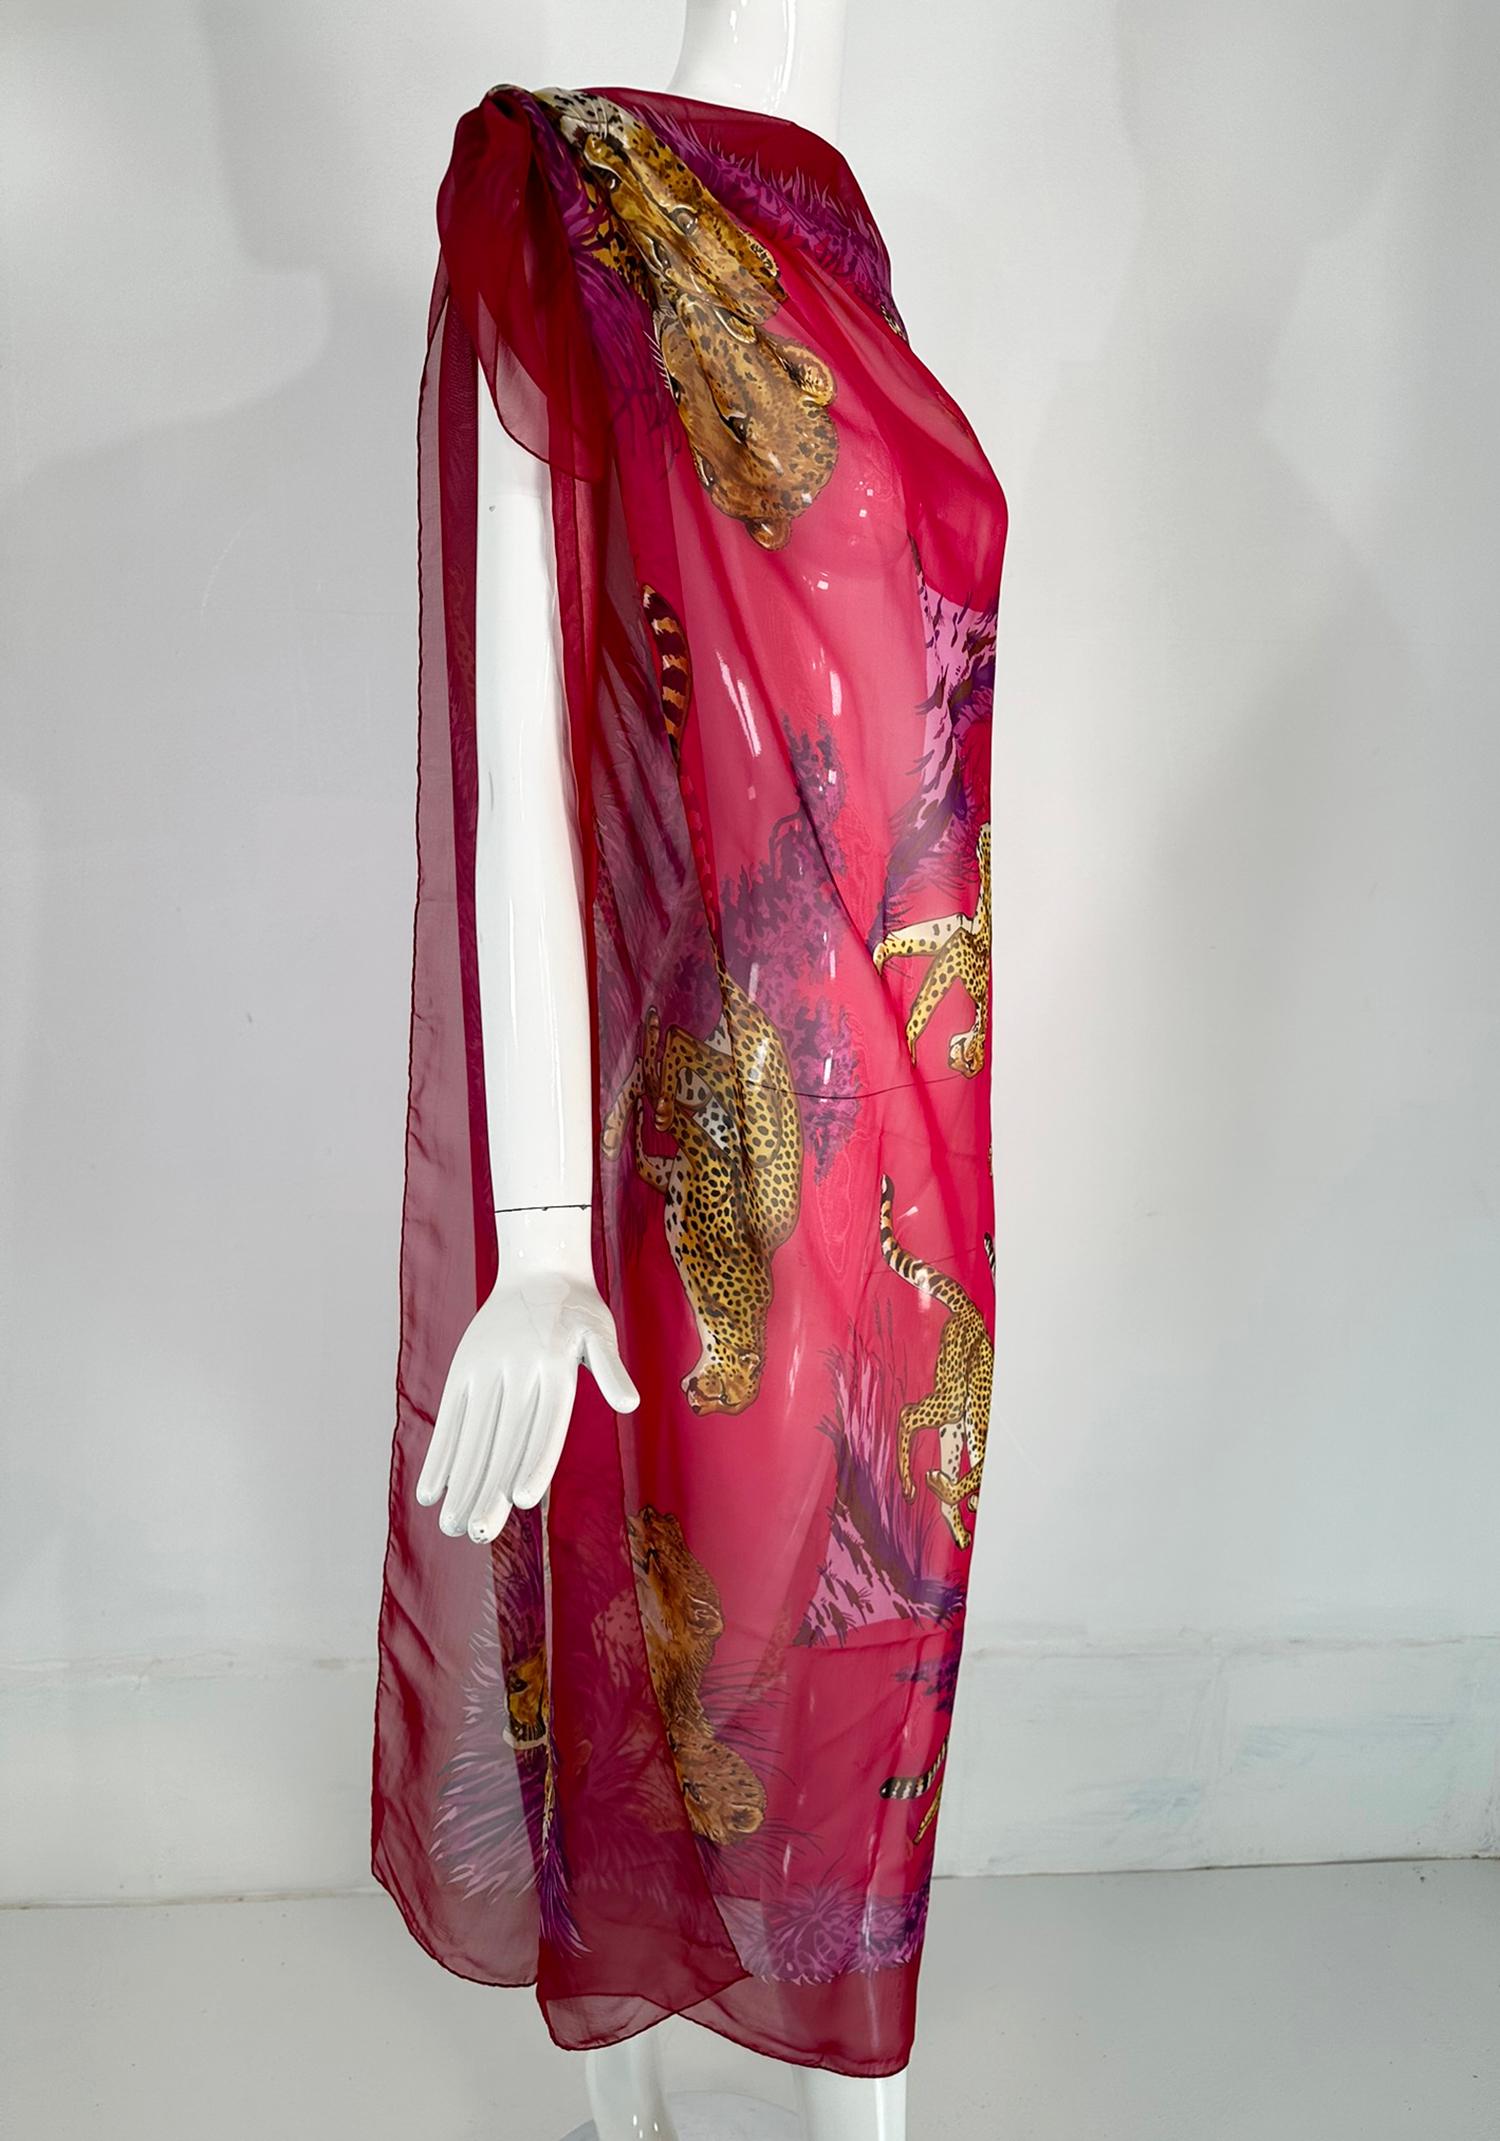 Hermes Guepards GM Silk Mousseline Chiffon Shawl  Designed by Robert Dallet 2007 For Sale 2